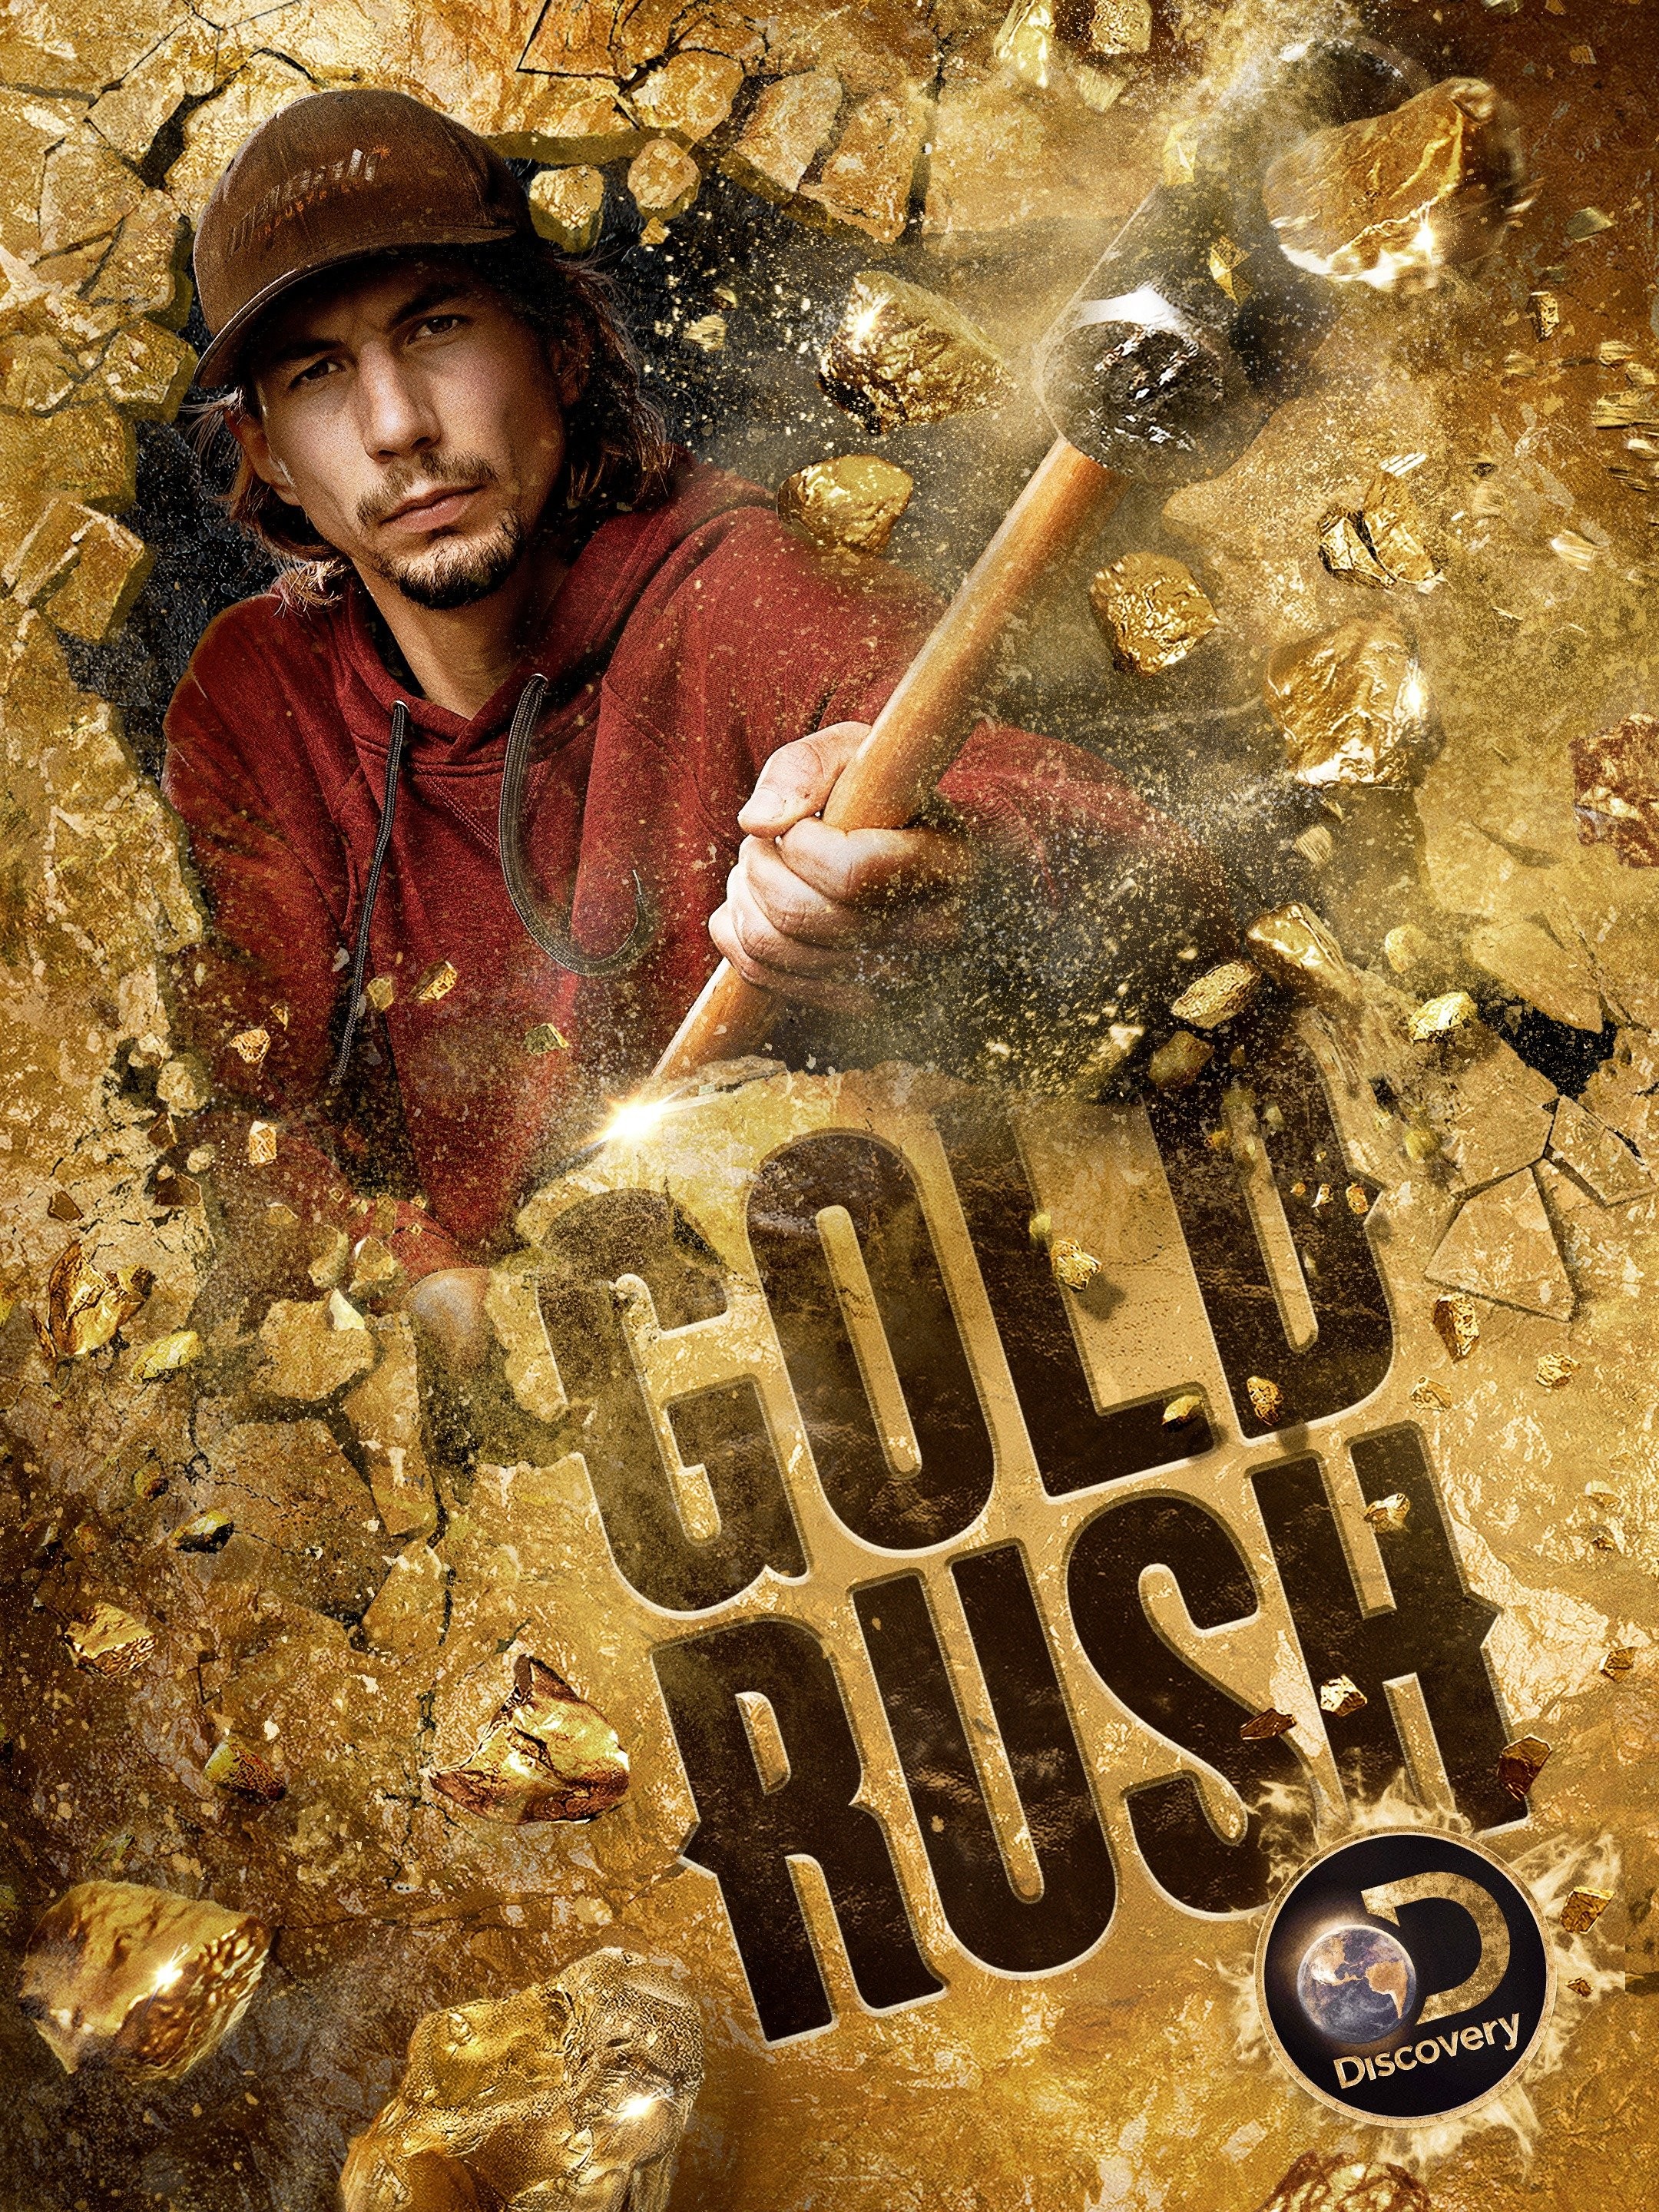 Mineral and Gold Prospecting - reality TV shows